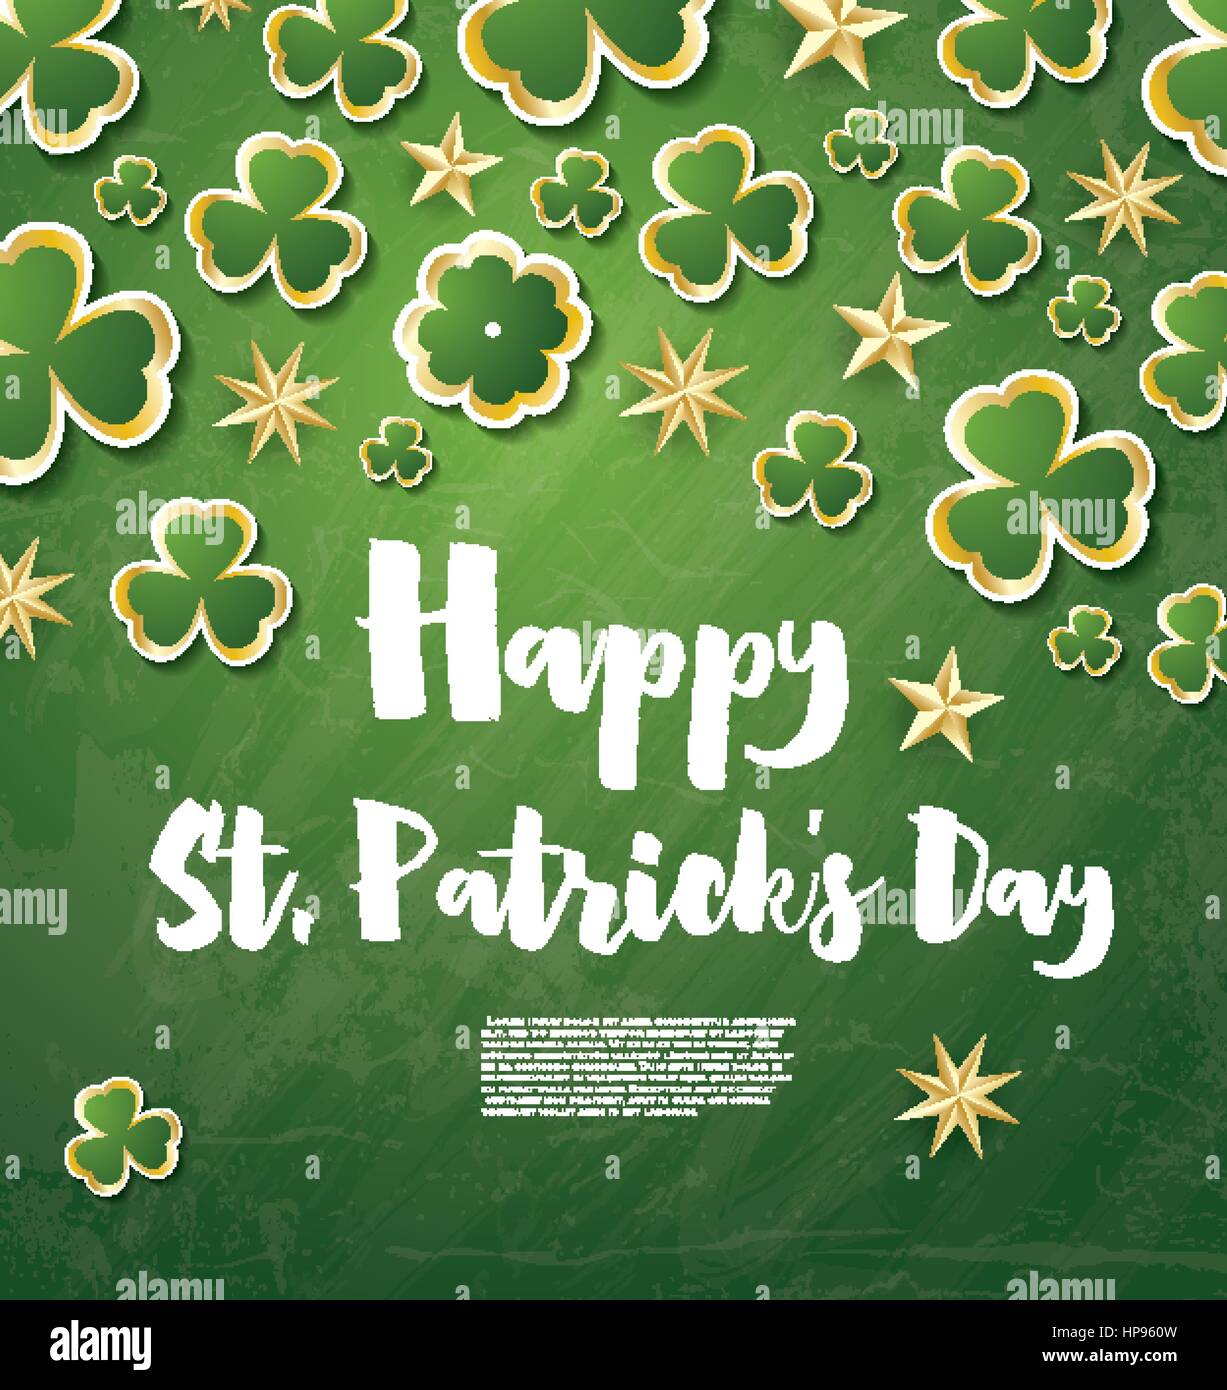 222,300 St Patricks Day Images, Stock Photos, 3D objects, & Vectors